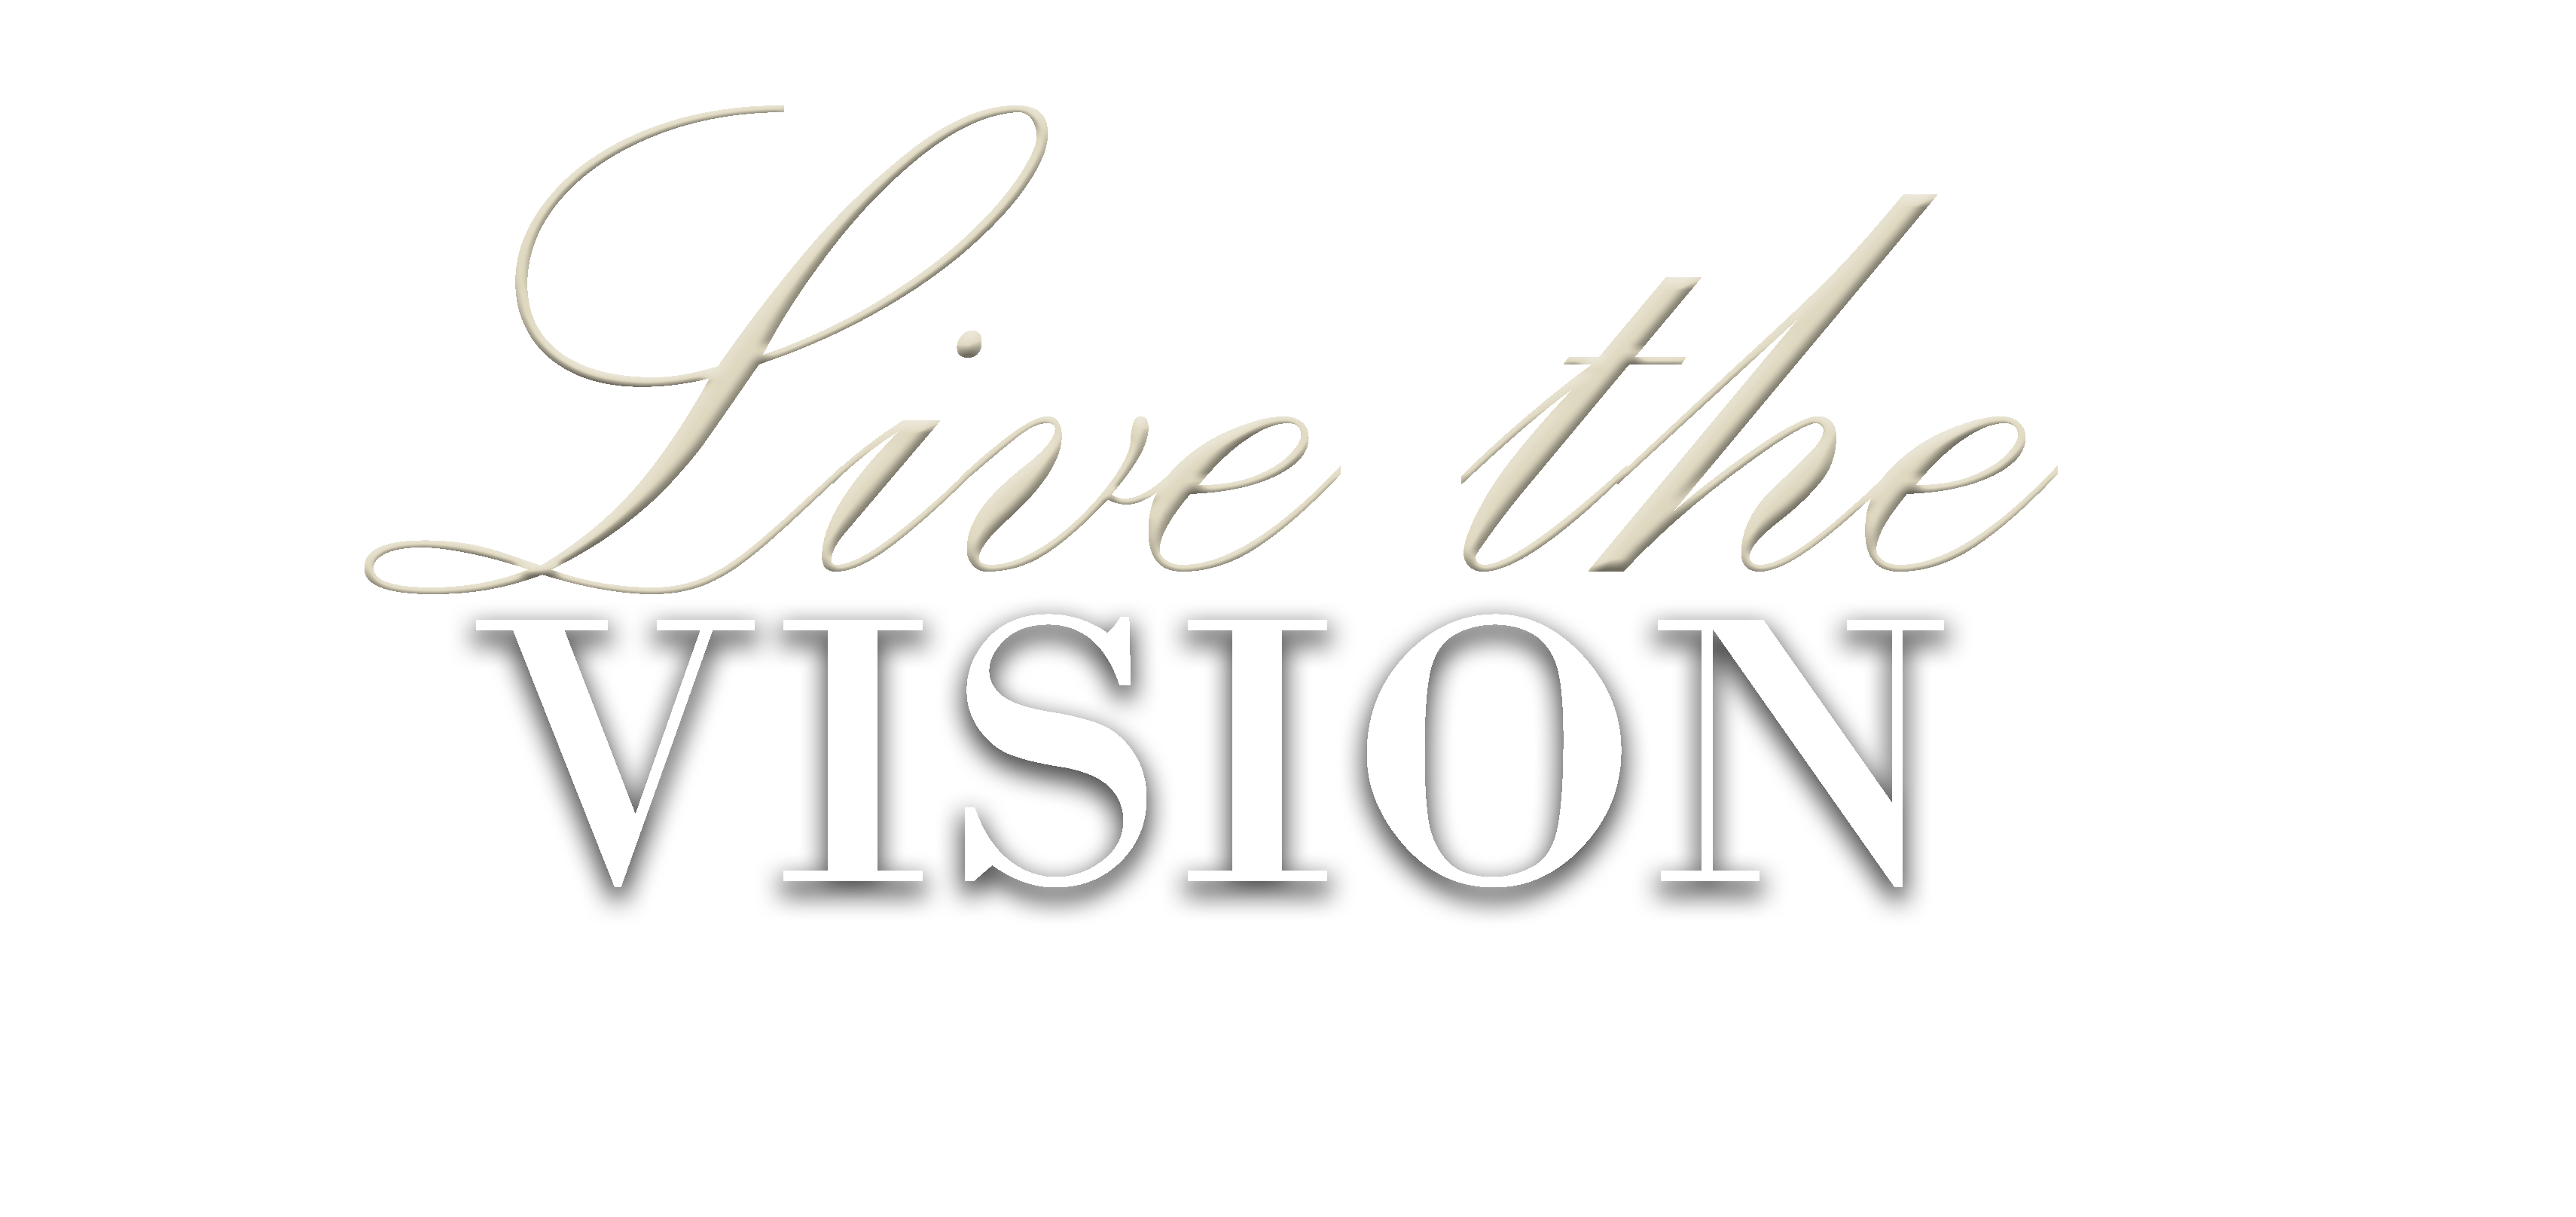 Live the Vision Header ghosted